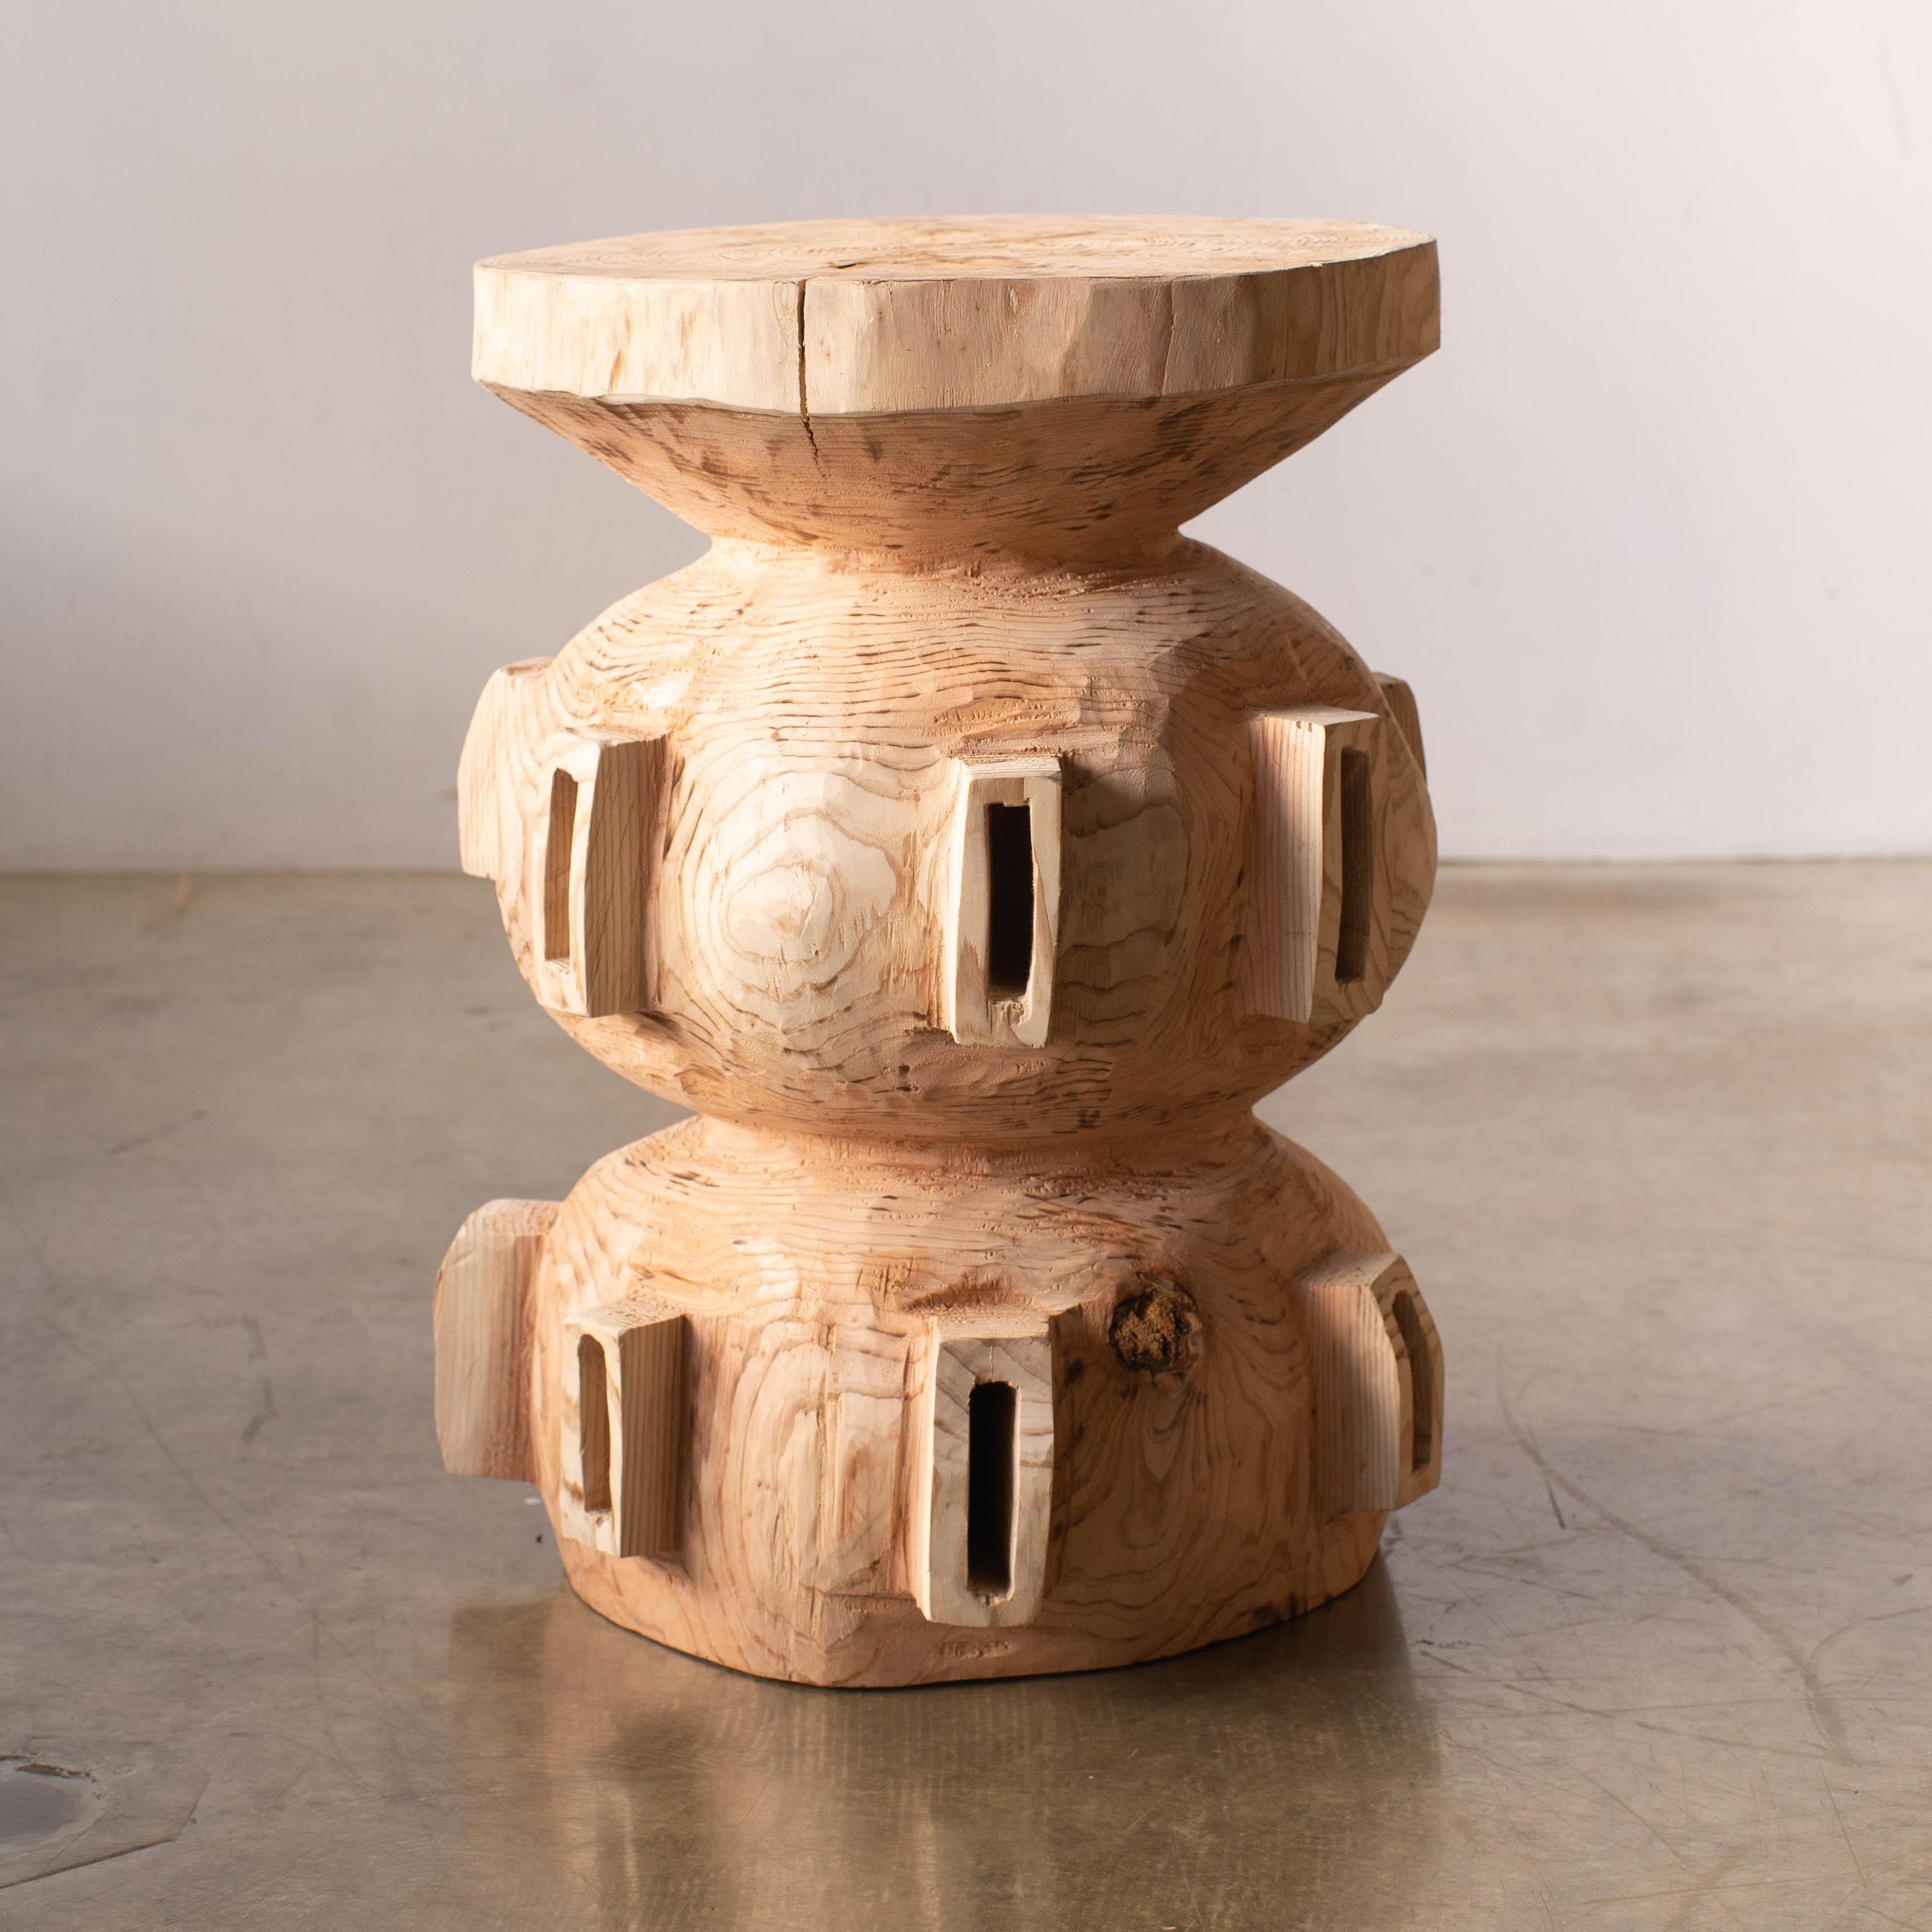 Hand-Carved Hiroyuki Nishimura and Sculptural Stool Side Table 15-2 Tribal Glamping